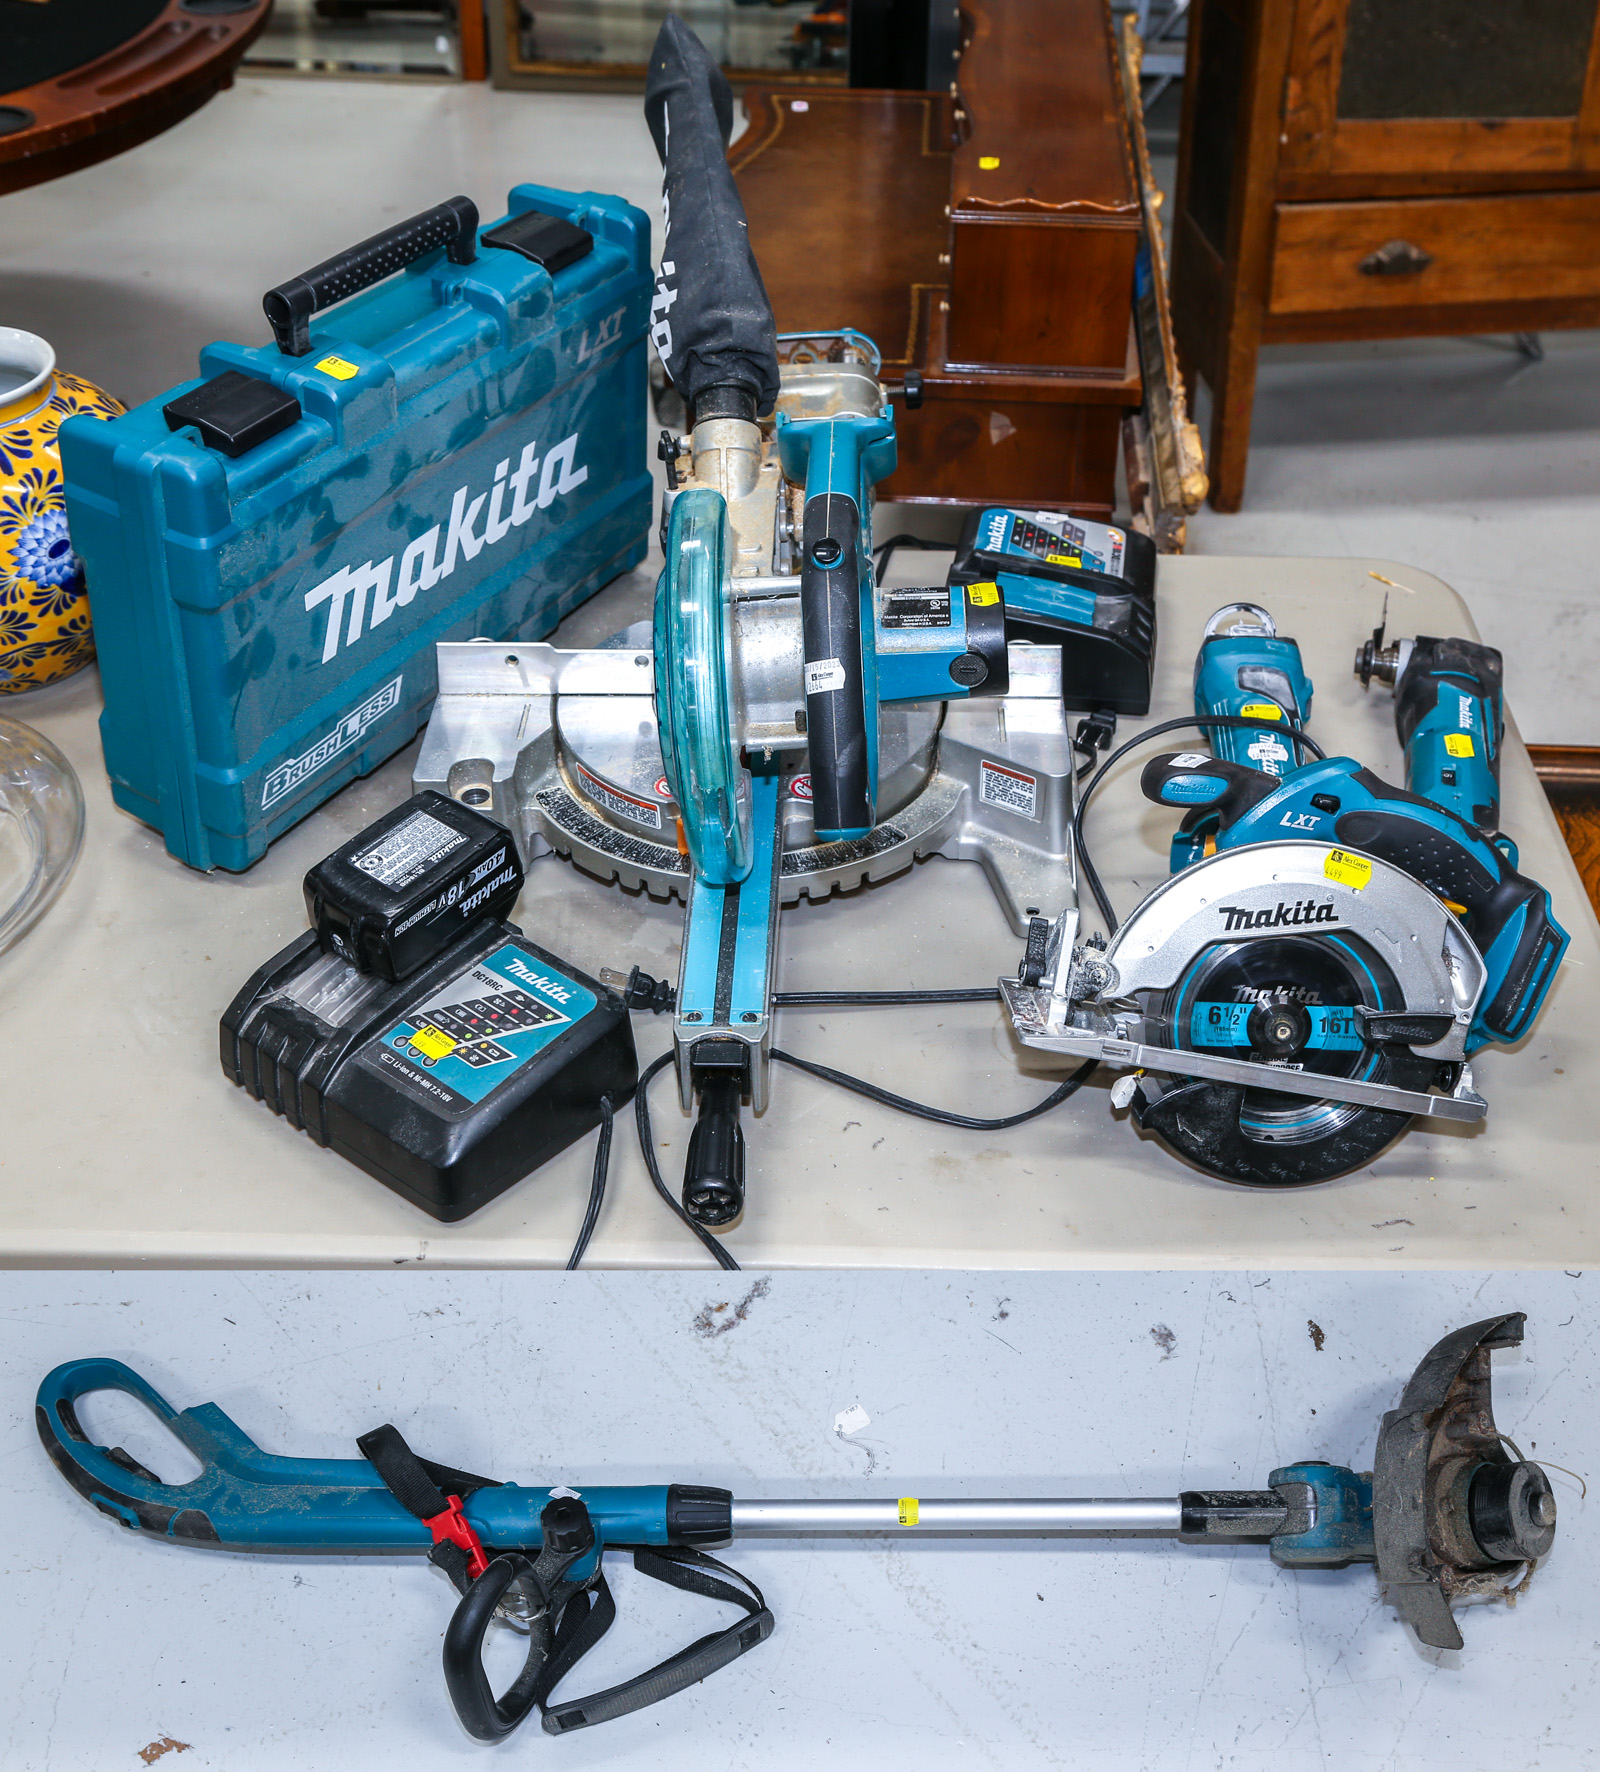 GROUP OF MAKITA BATTERY OPERATED